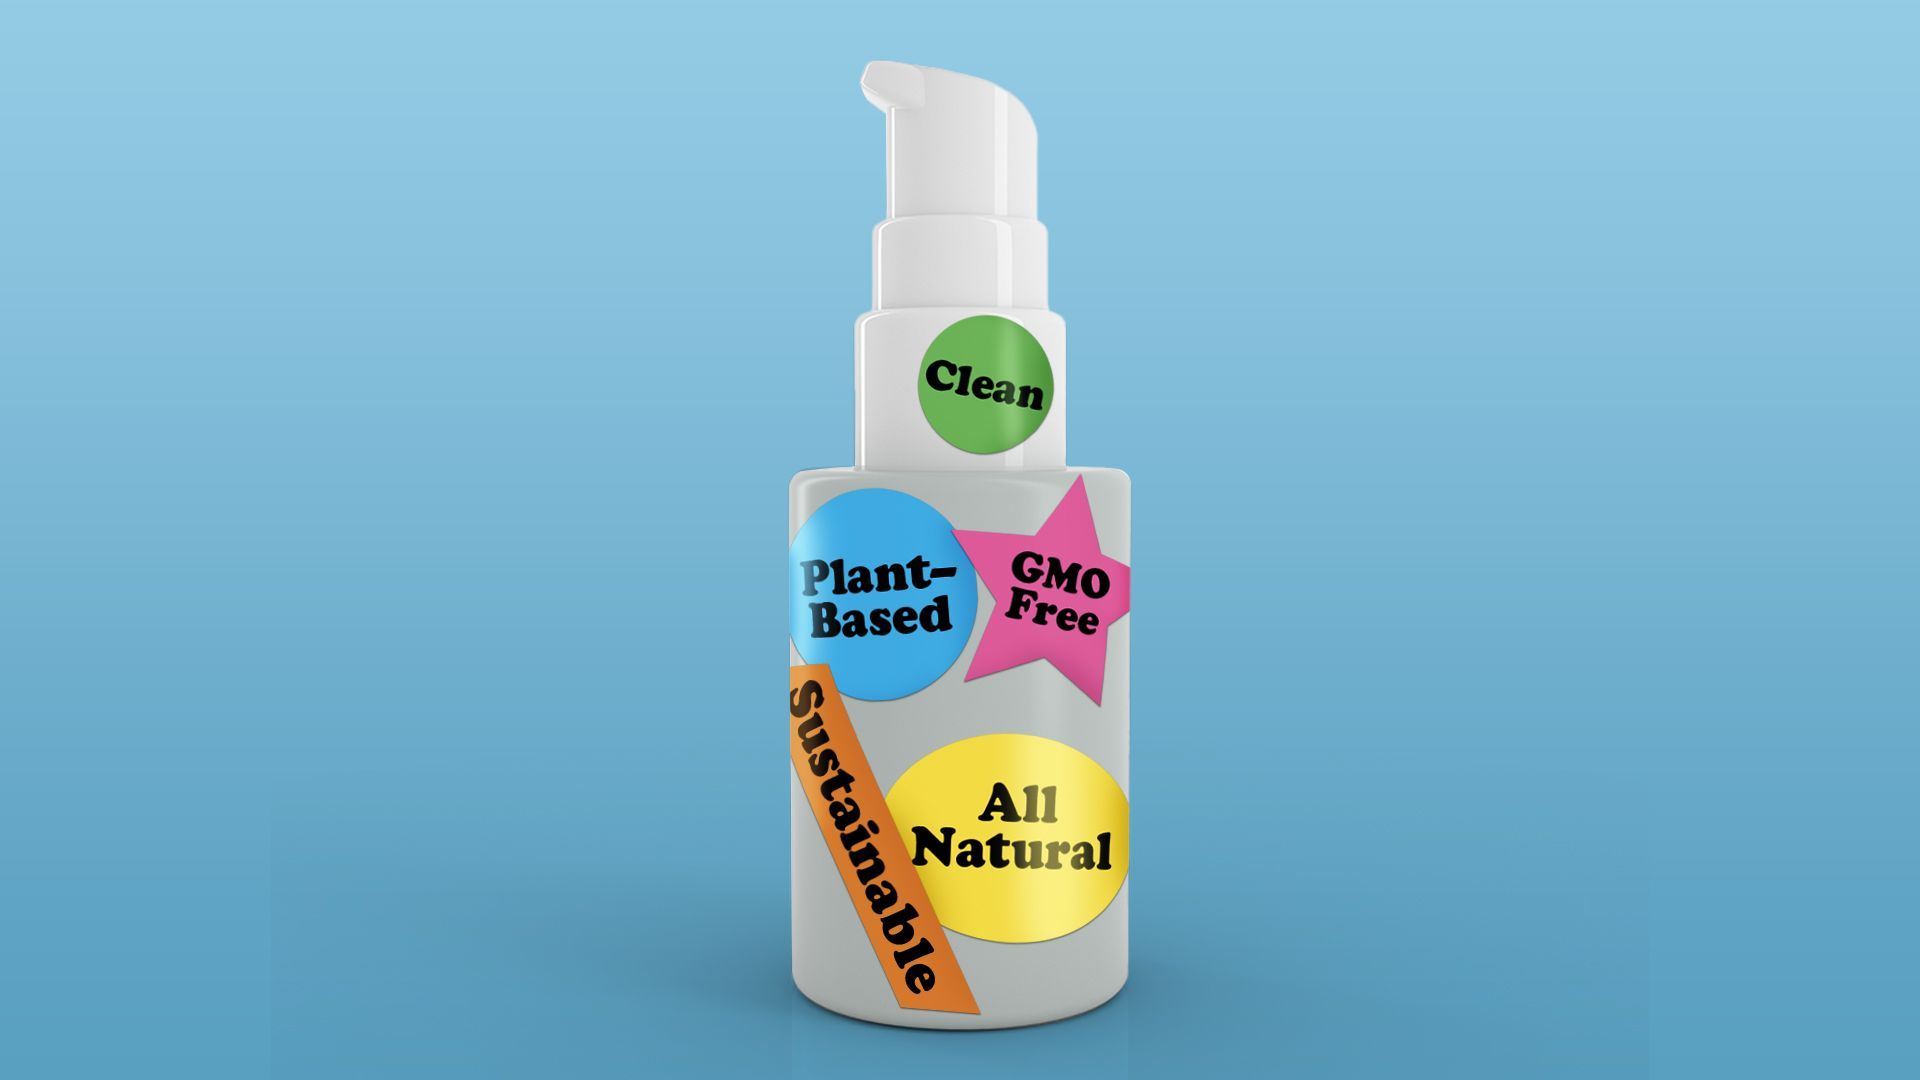 Illustration of a lotion bottle with stickers all over it that say All Natural, Sustainable, Plant-Based, GMO free, Clean